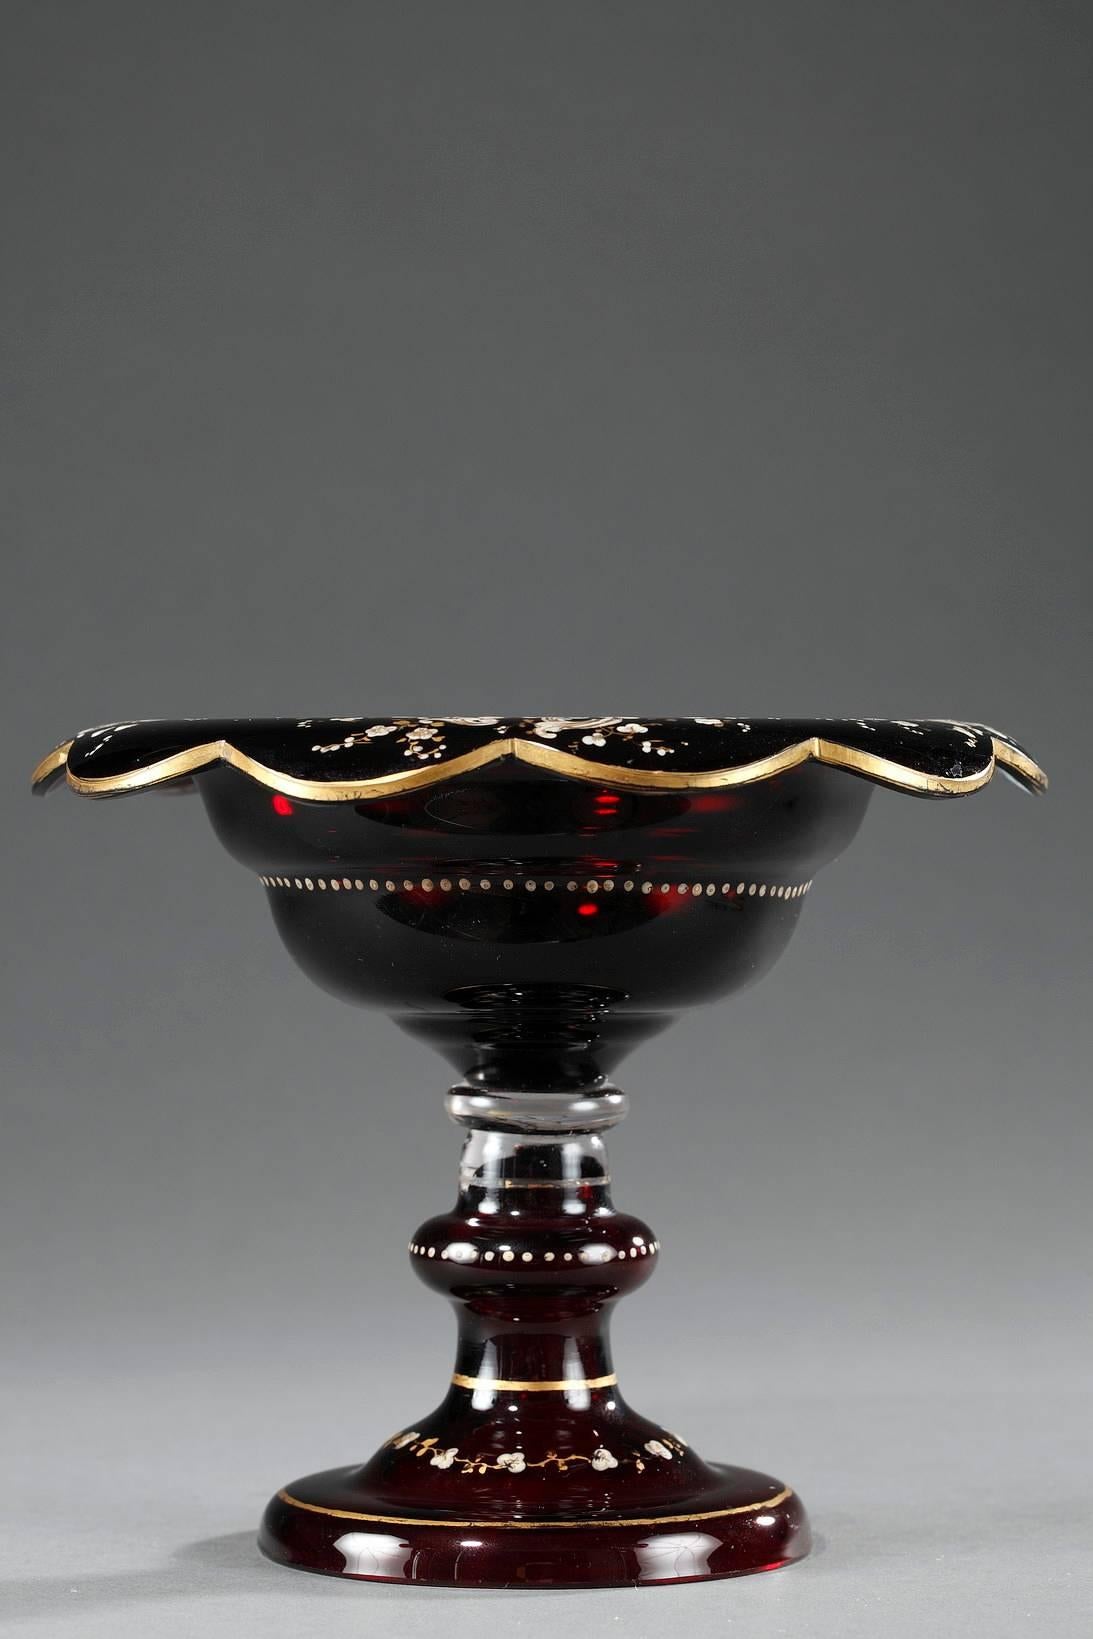 Ruby red, Bohemian crystal cup with a large, petal-shaped rim. It is decorated with enameled rinceau that is highlighted with gilded, flowering branches. The rim, stem and foot have gilded bands, and a ring of dots encircles the body of the cup and